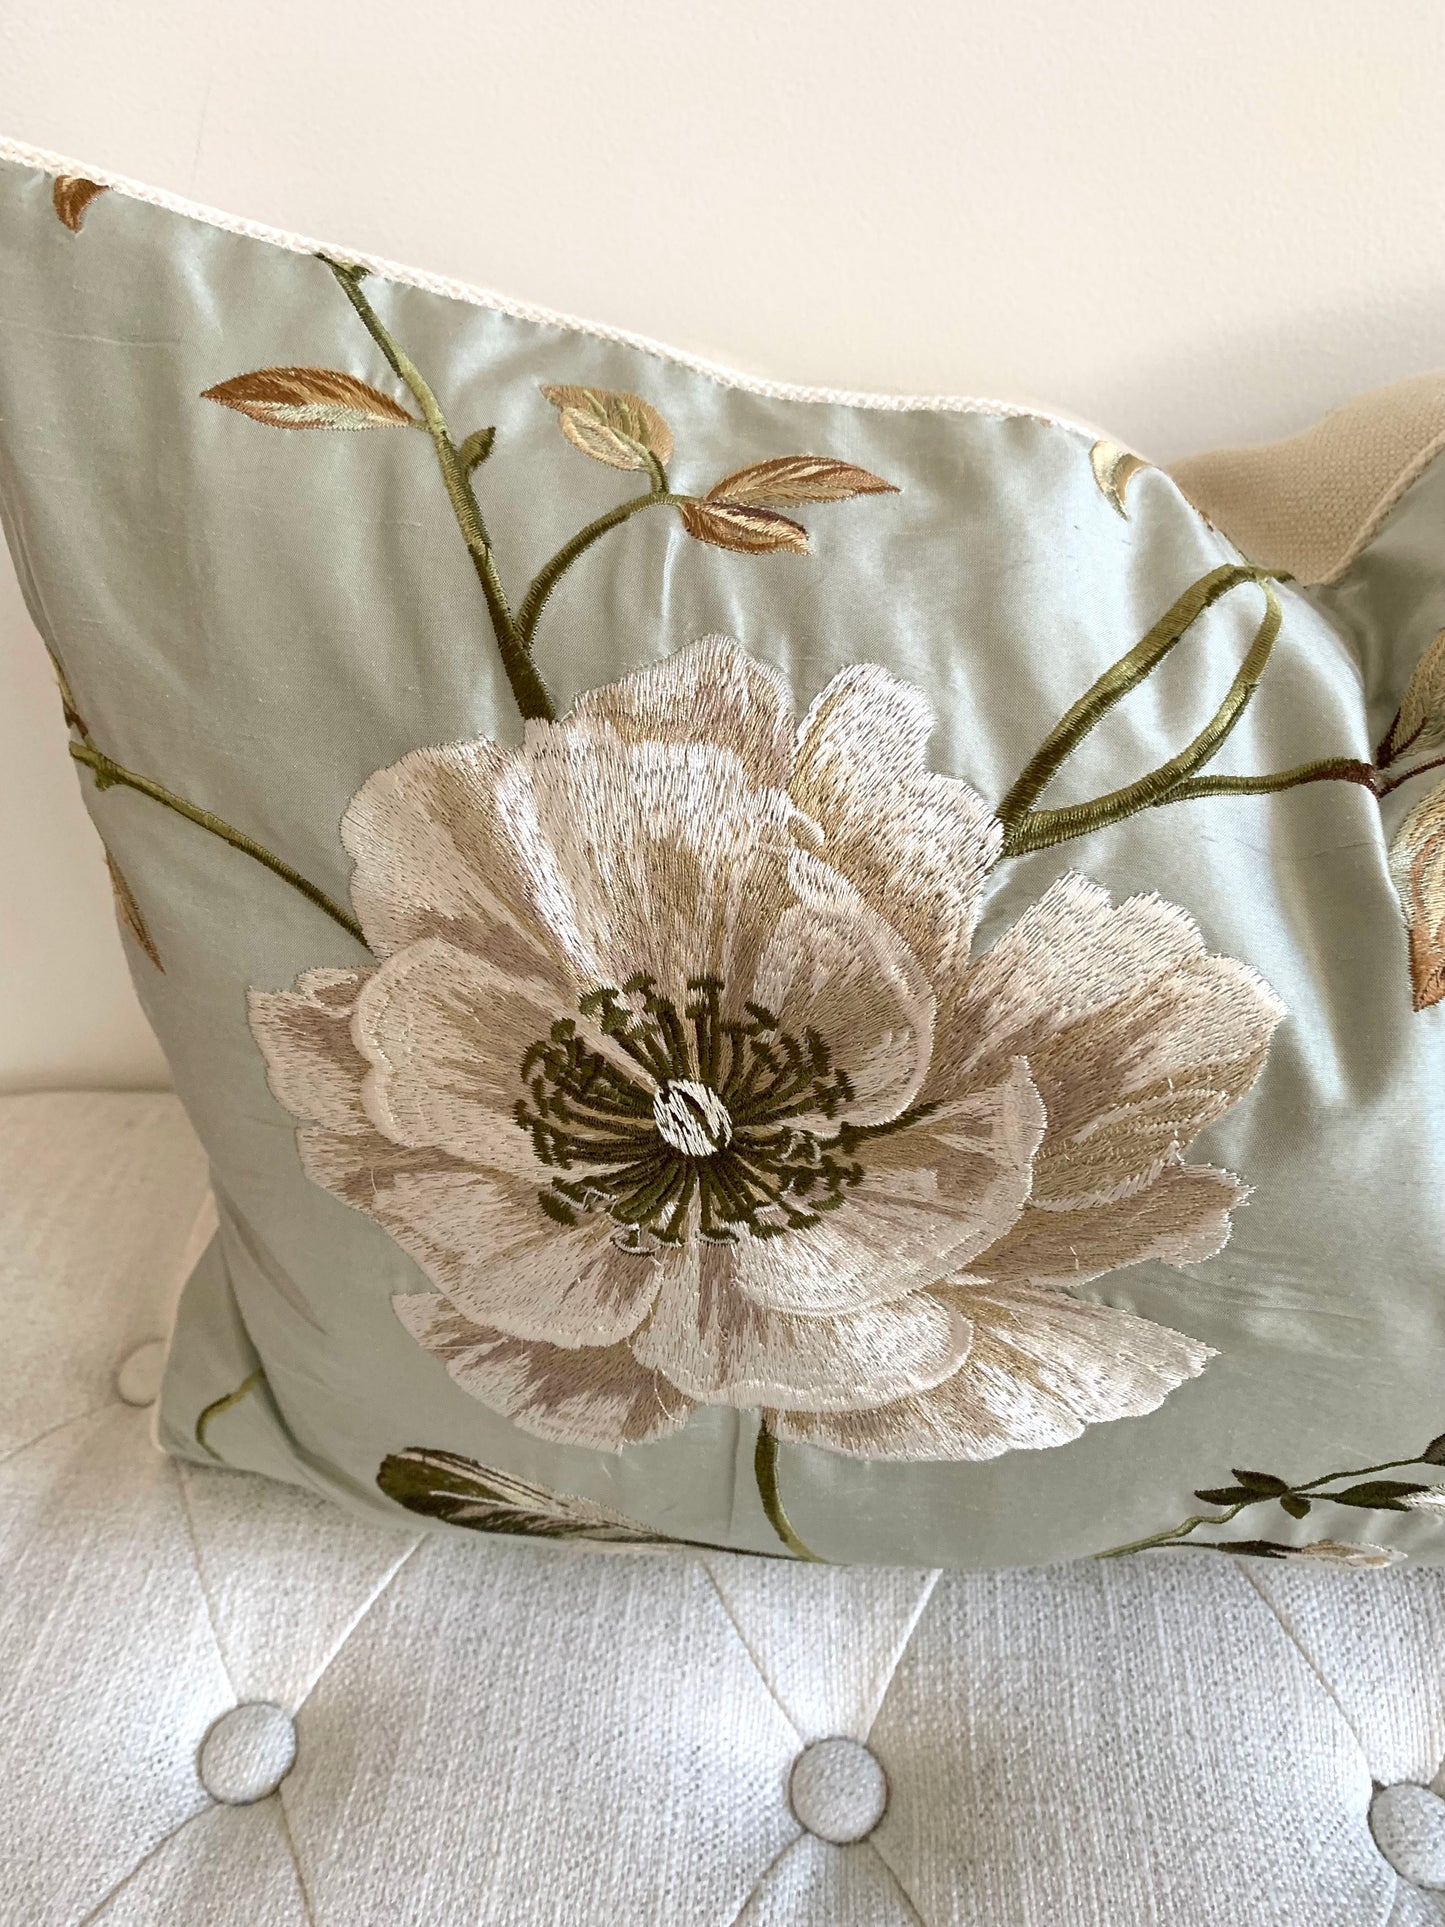 Evesham silk floral pillow cover - Old blue